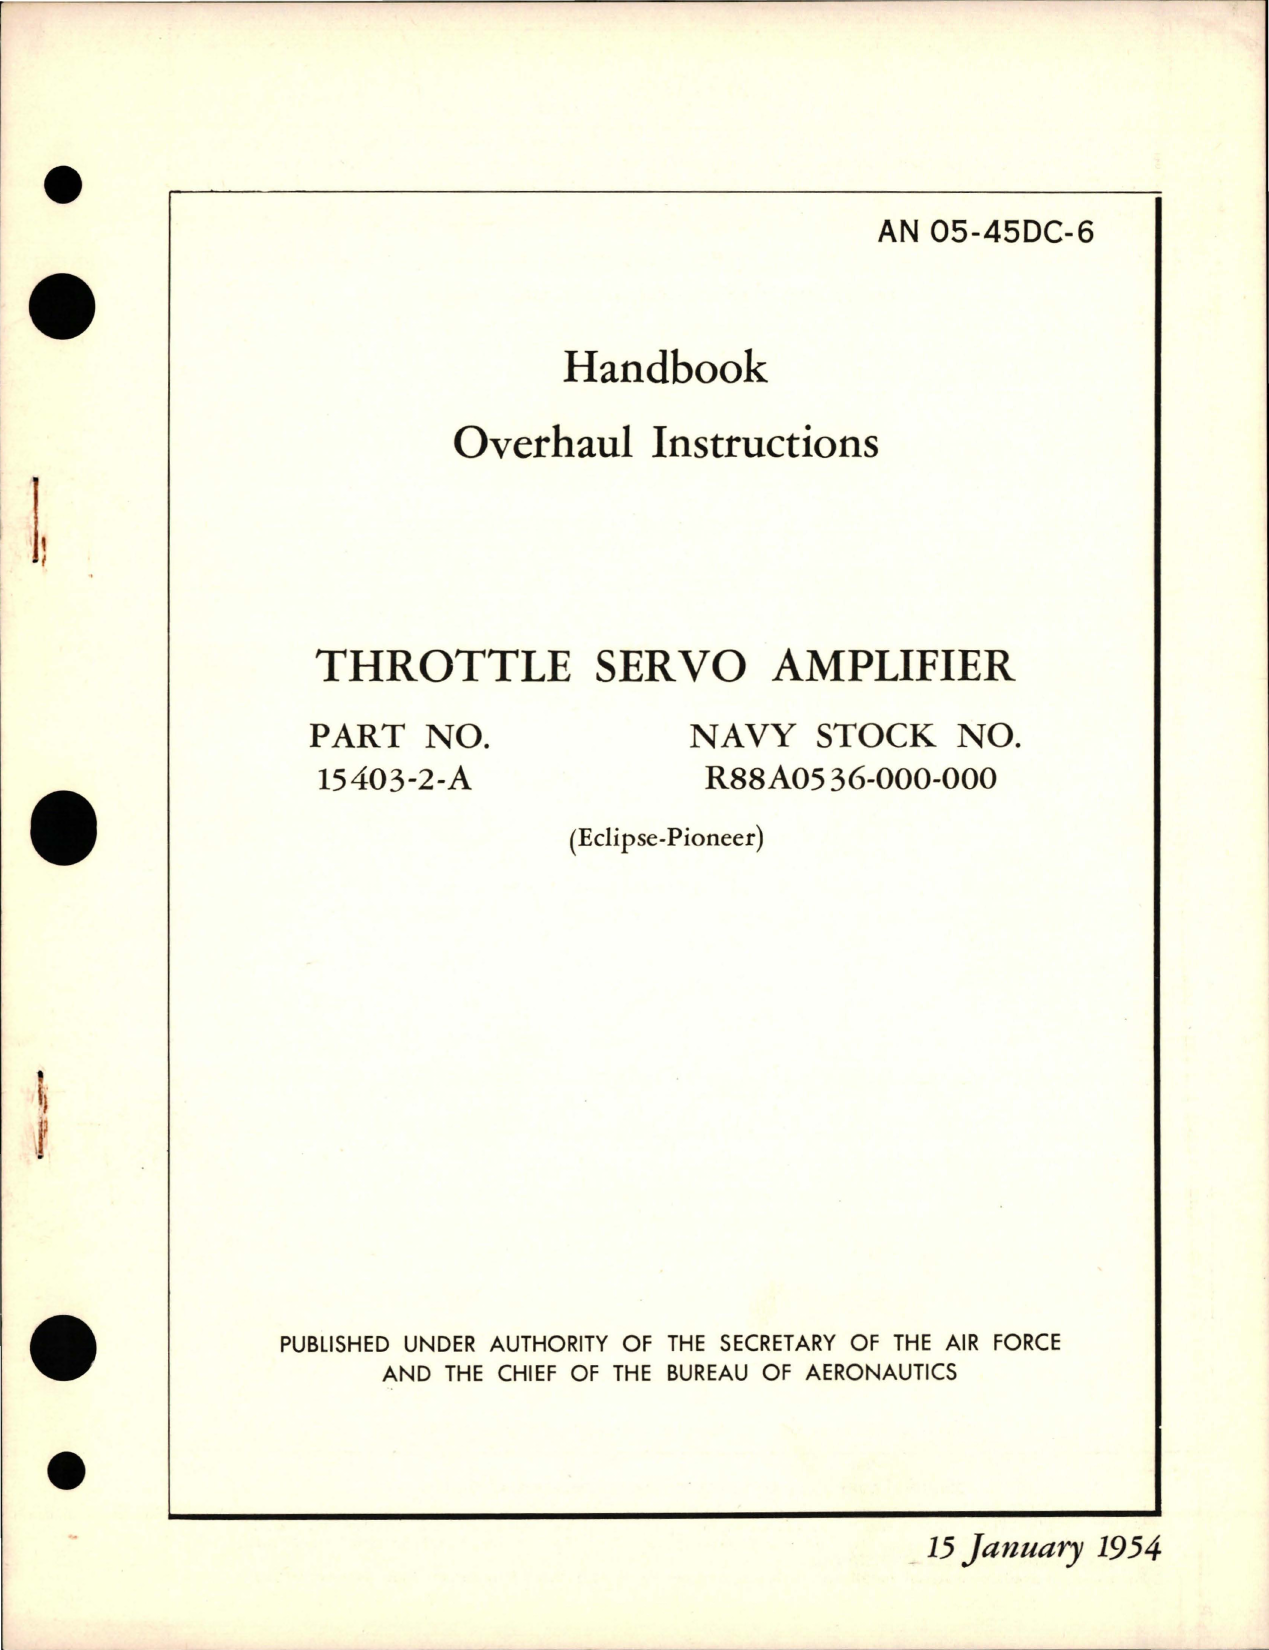 Sample page 1 from AirCorps Library document: Overhaul Instructions for Throttle Servo Amplifier - Part 15403-2-A